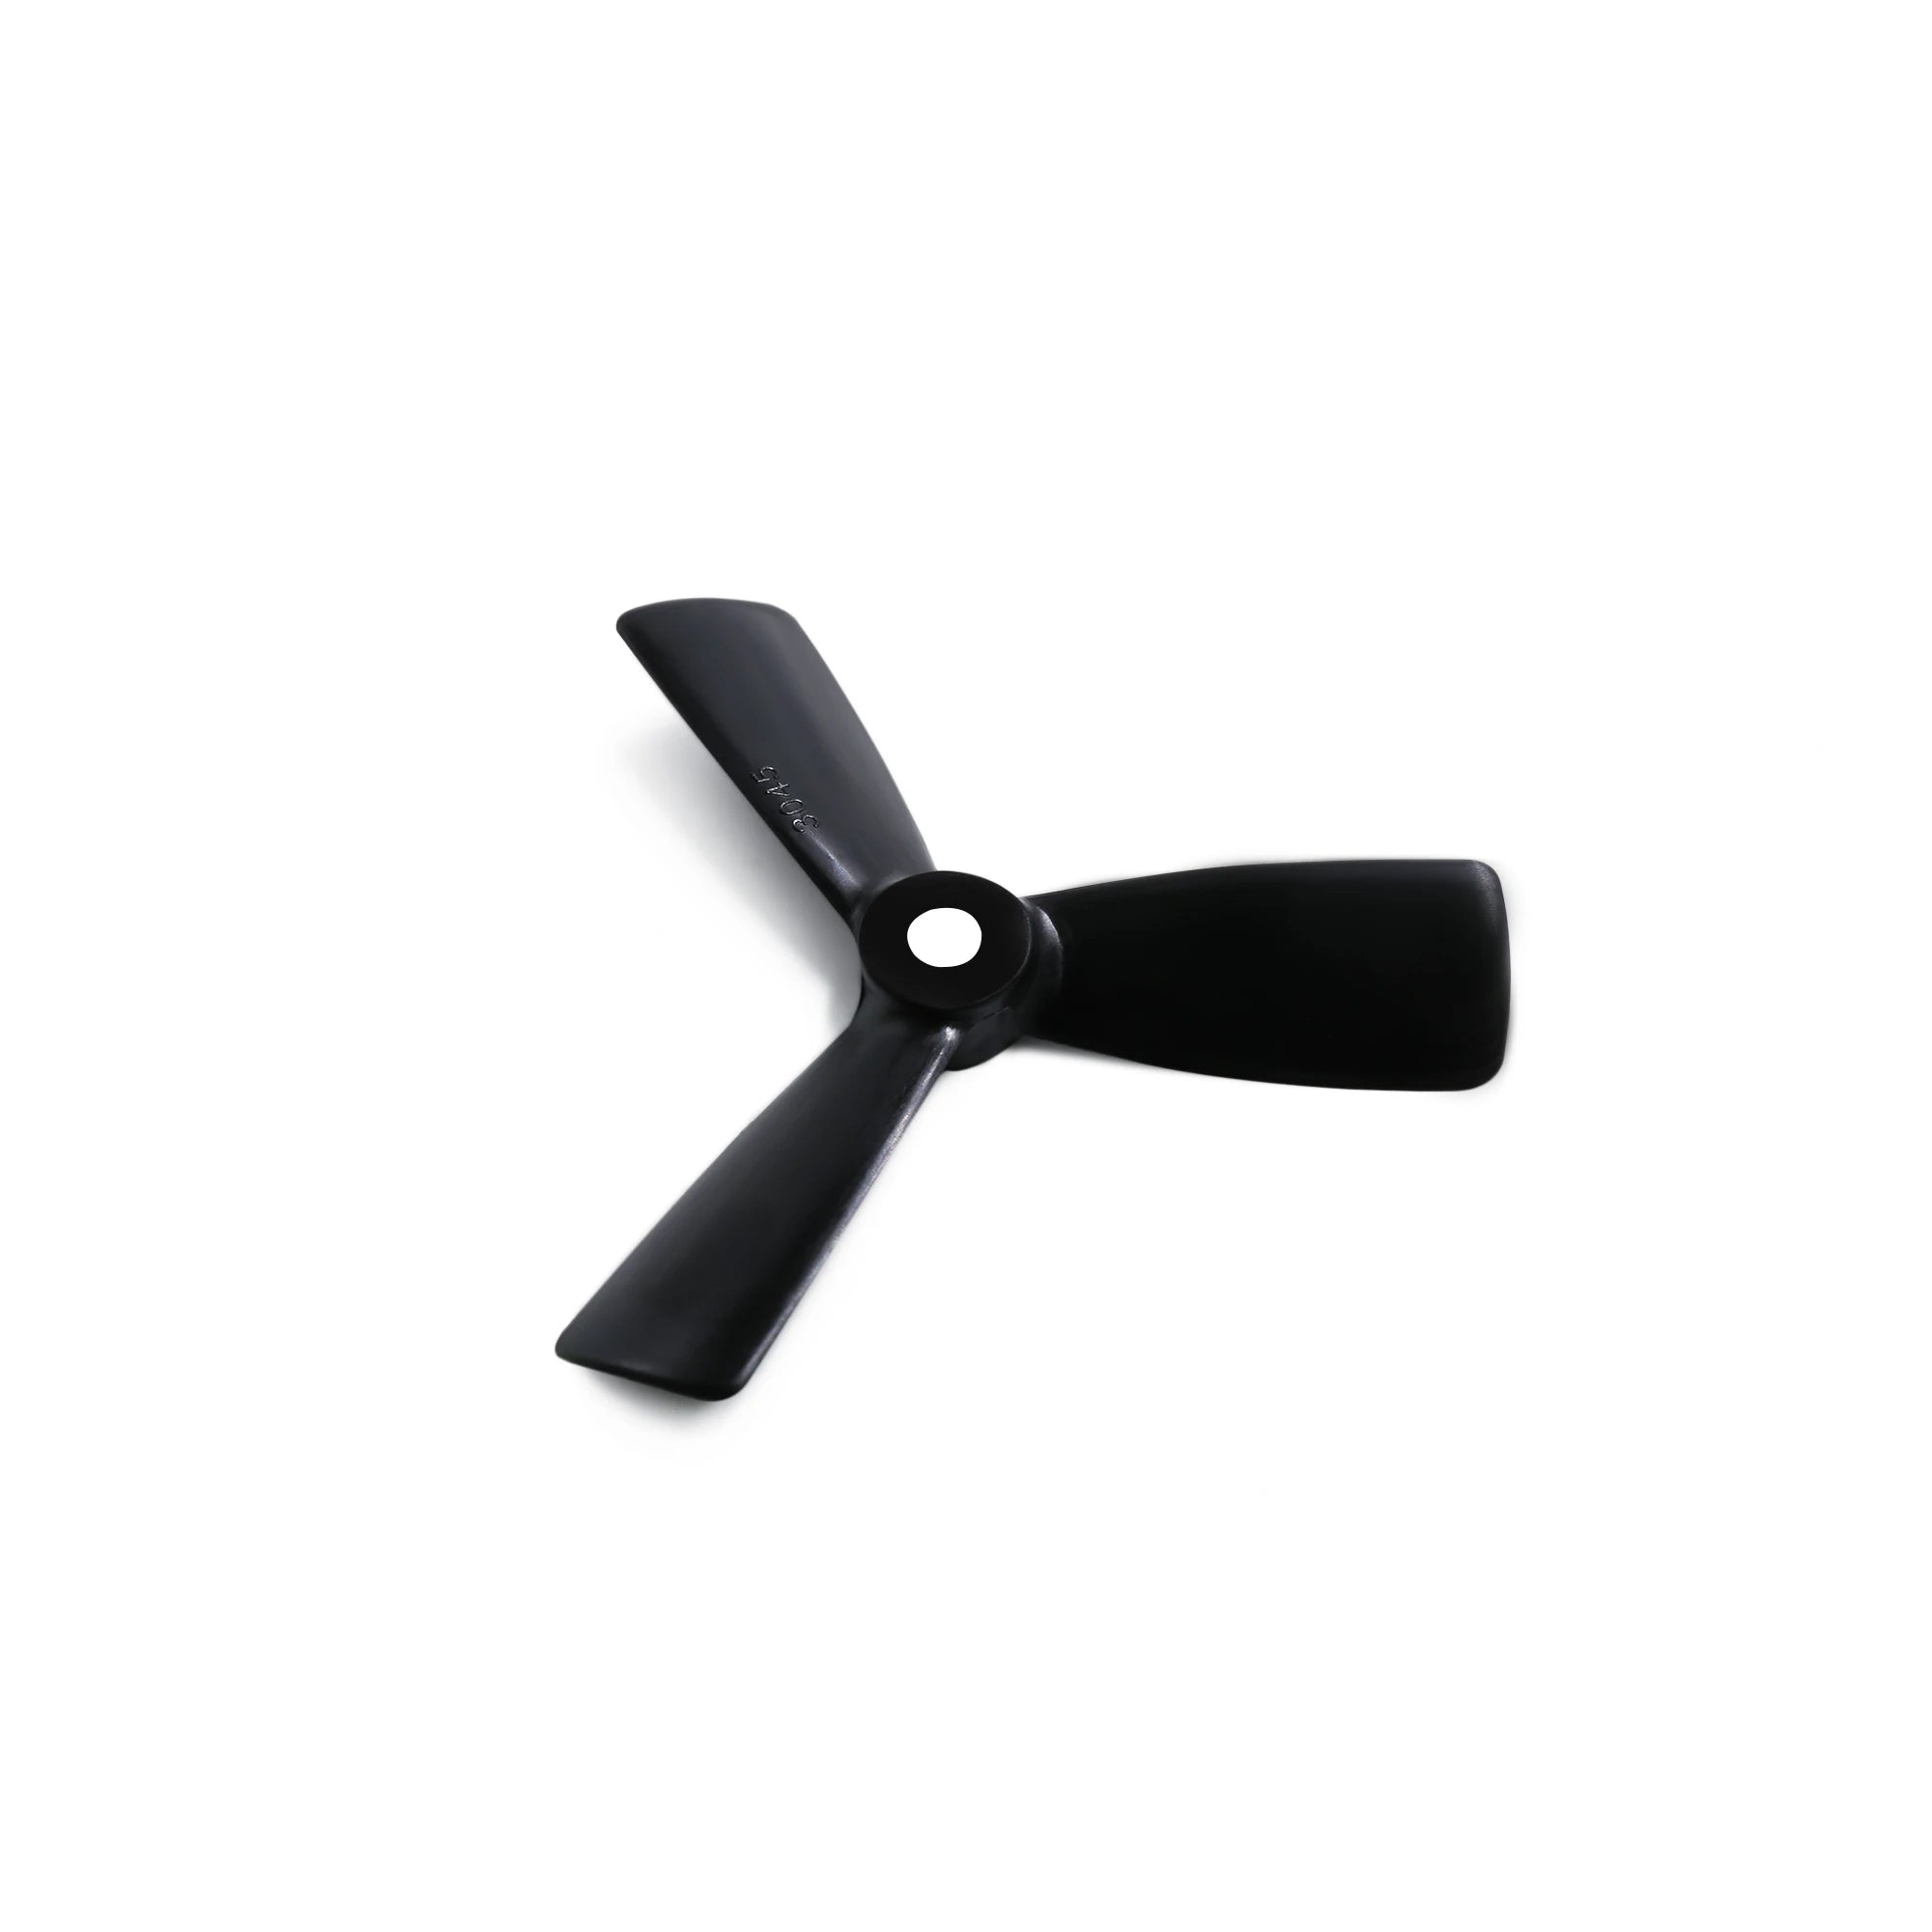 GEPRC G3045 Propeller, the optimized airfoil propeller design is not easy occurring such as blade flutter